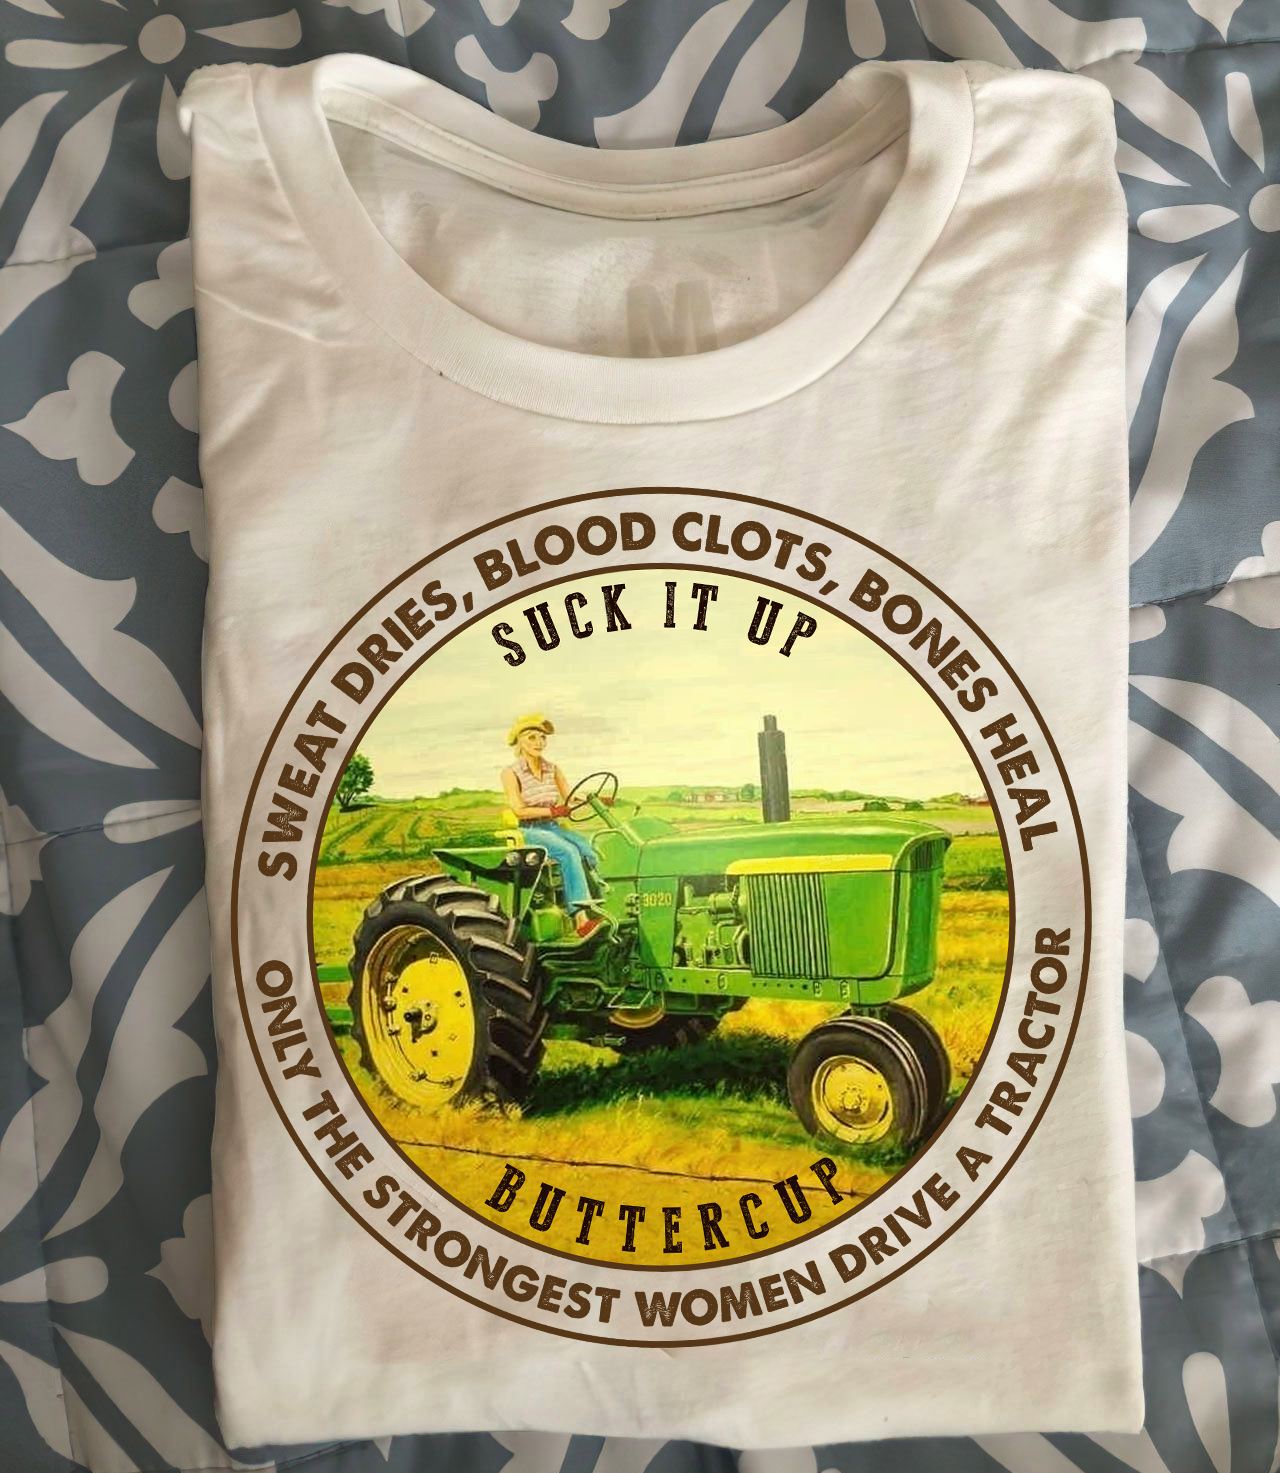 Sweat dries, blood clots, bones heal only the strongest women drive a tractor - Buttercup